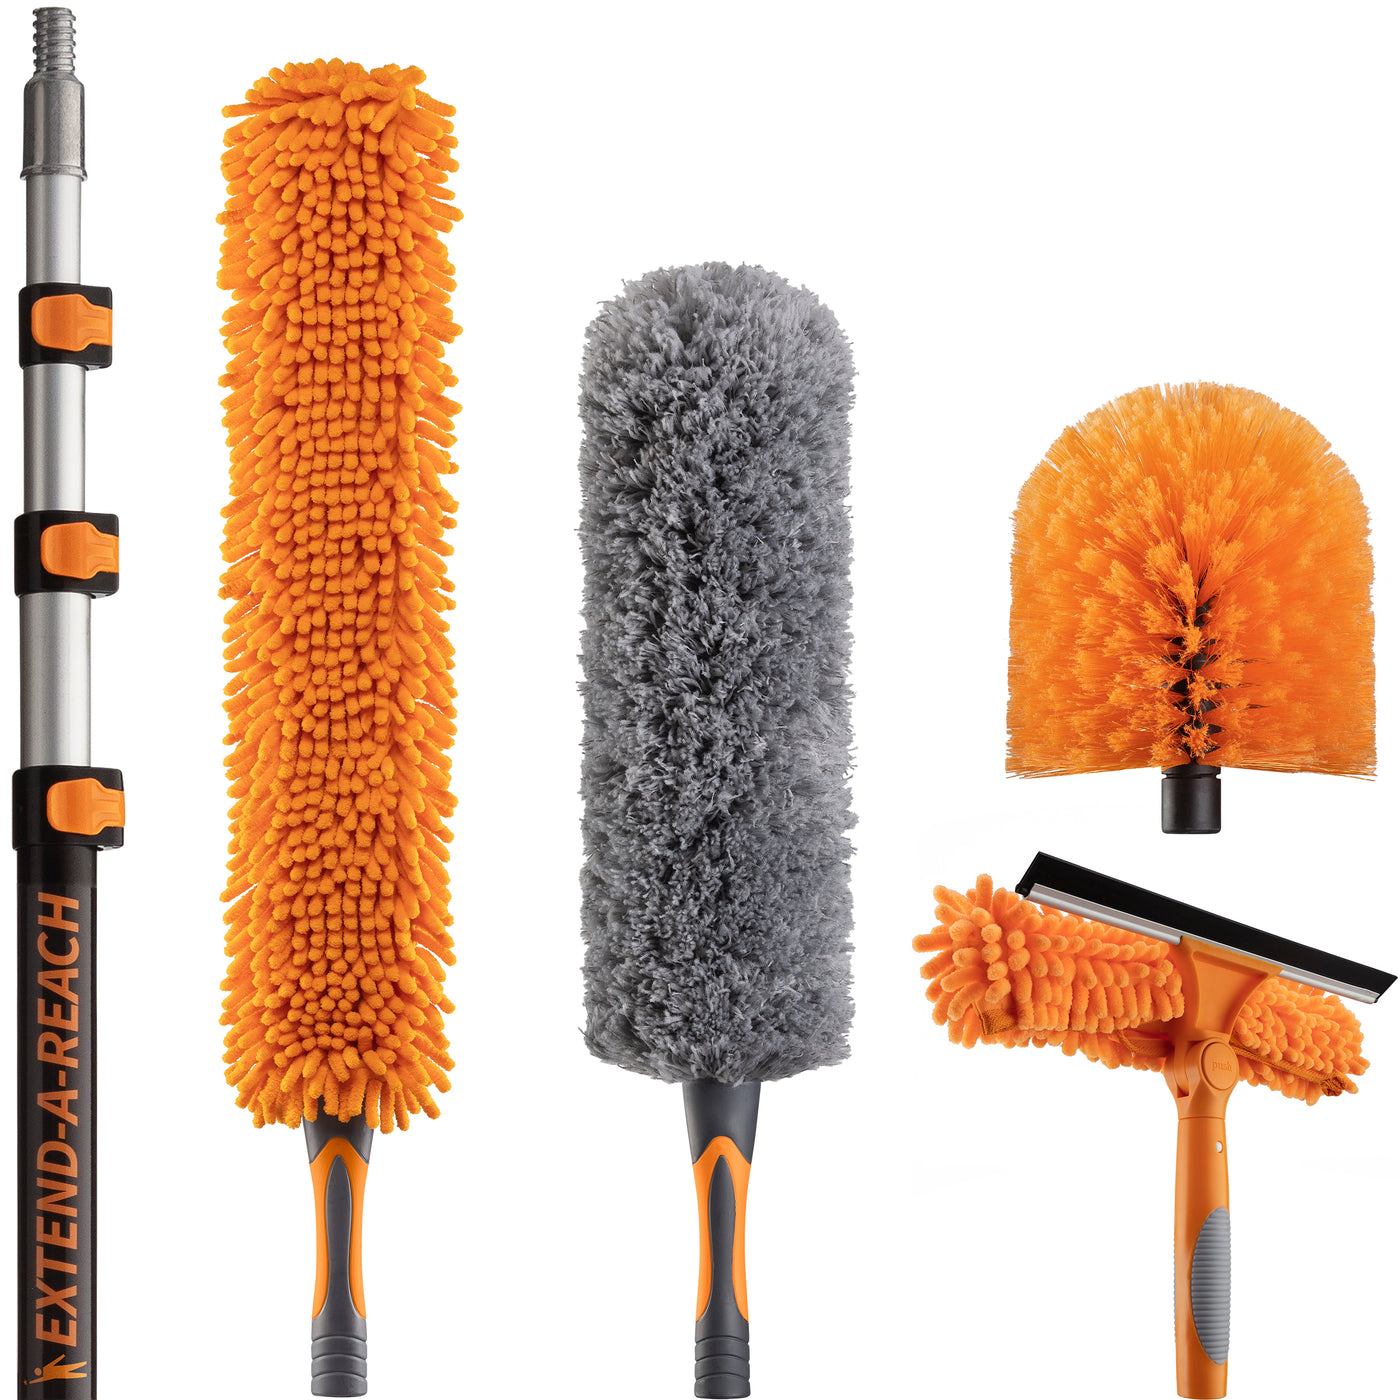 5-Piece High Reach Duster Kit with Extension Pole - The Ultimate Dusting Kit